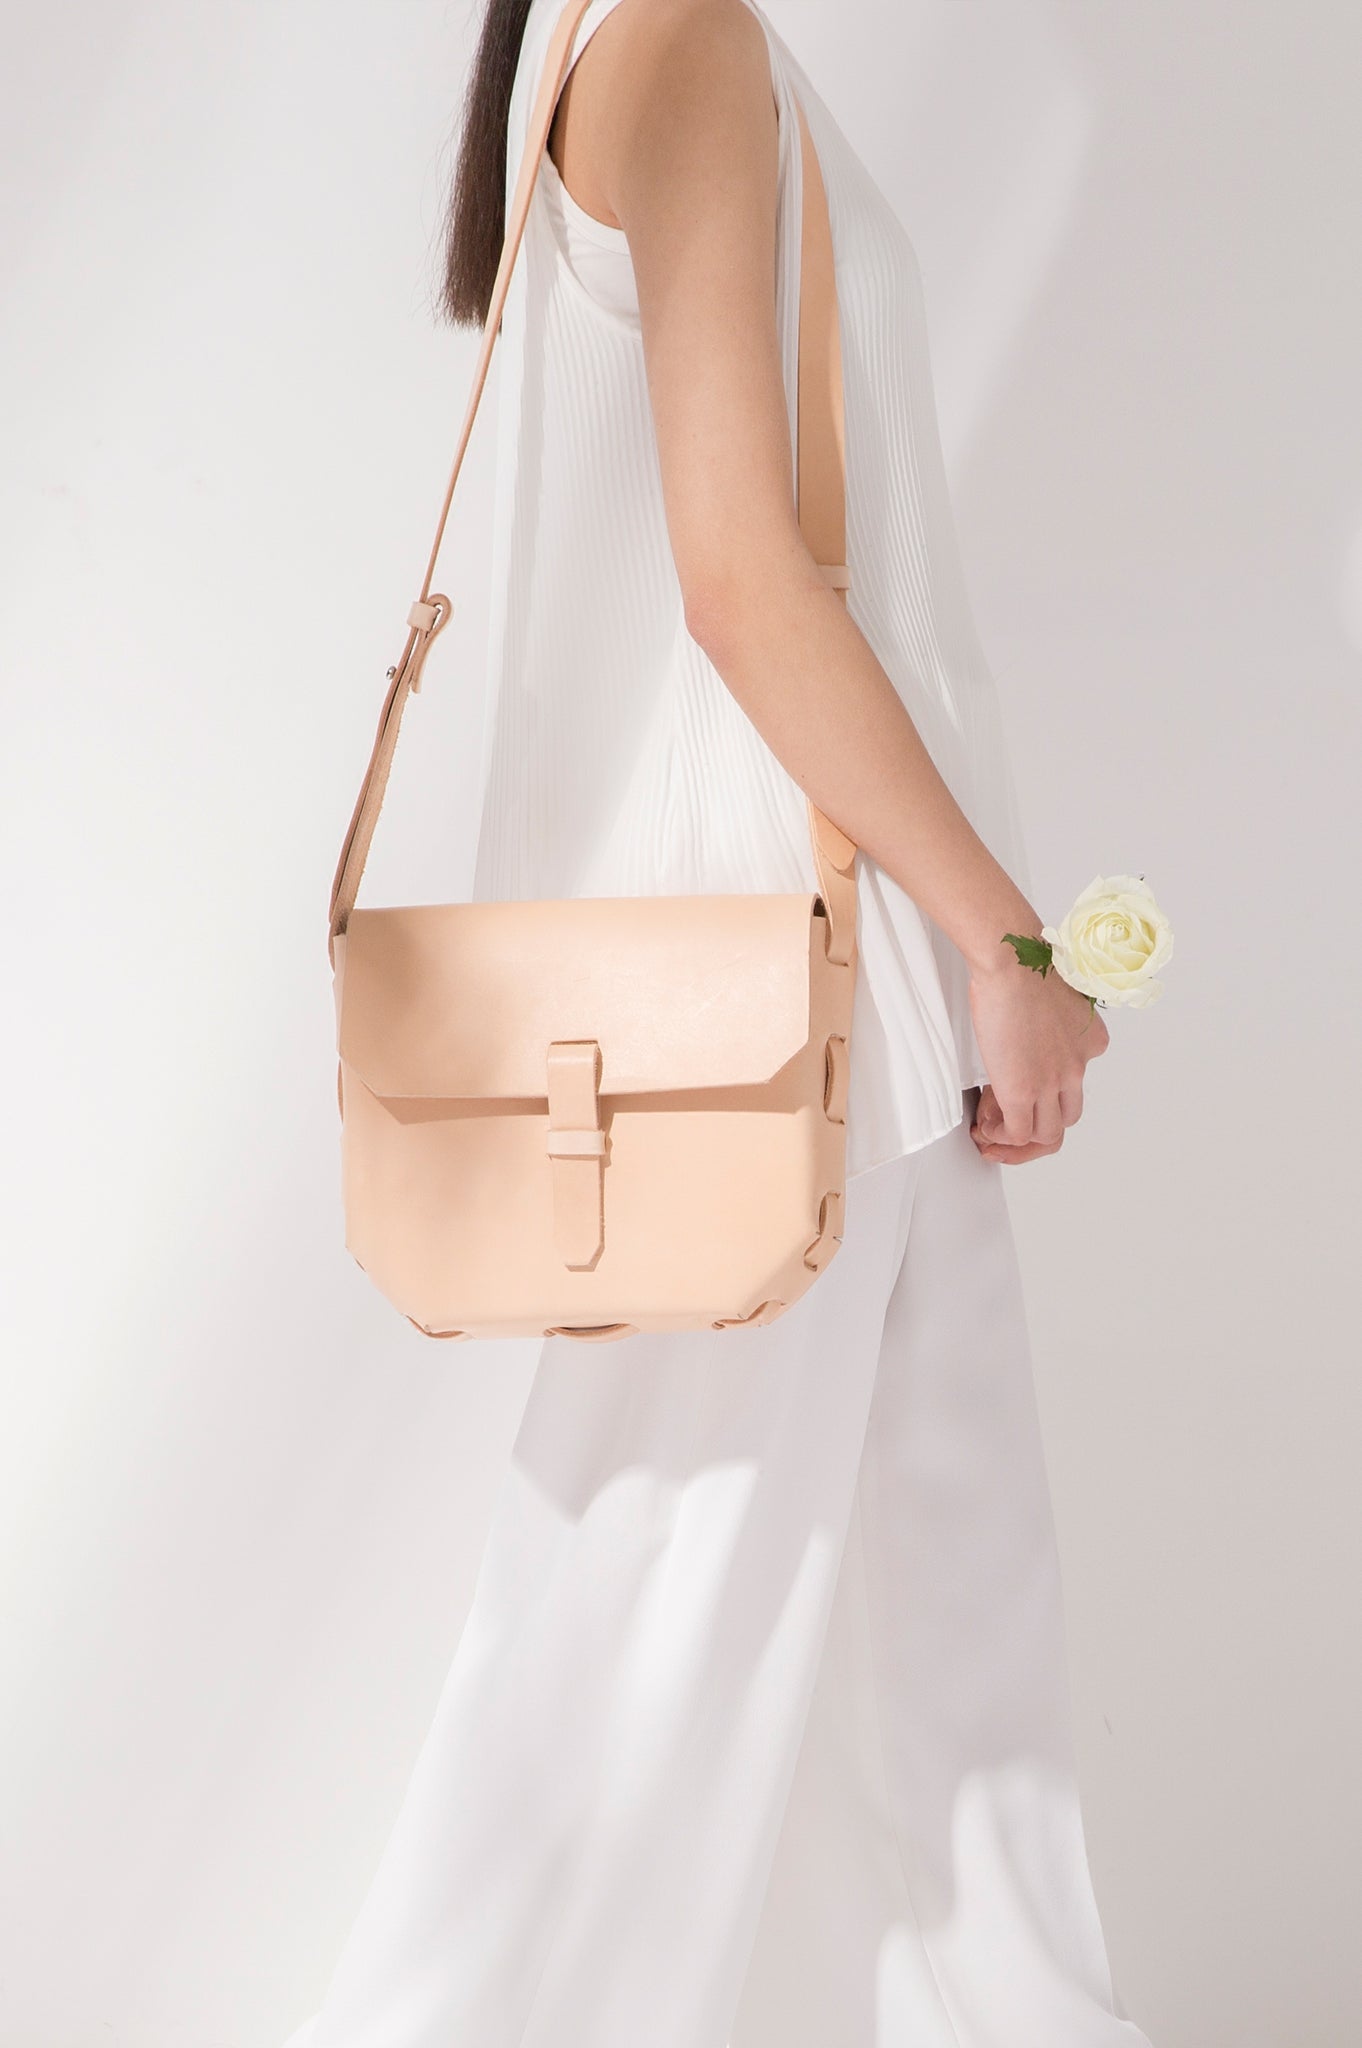 Small Handmade Beige Leather Purse - The Perfect Bag for Your Next